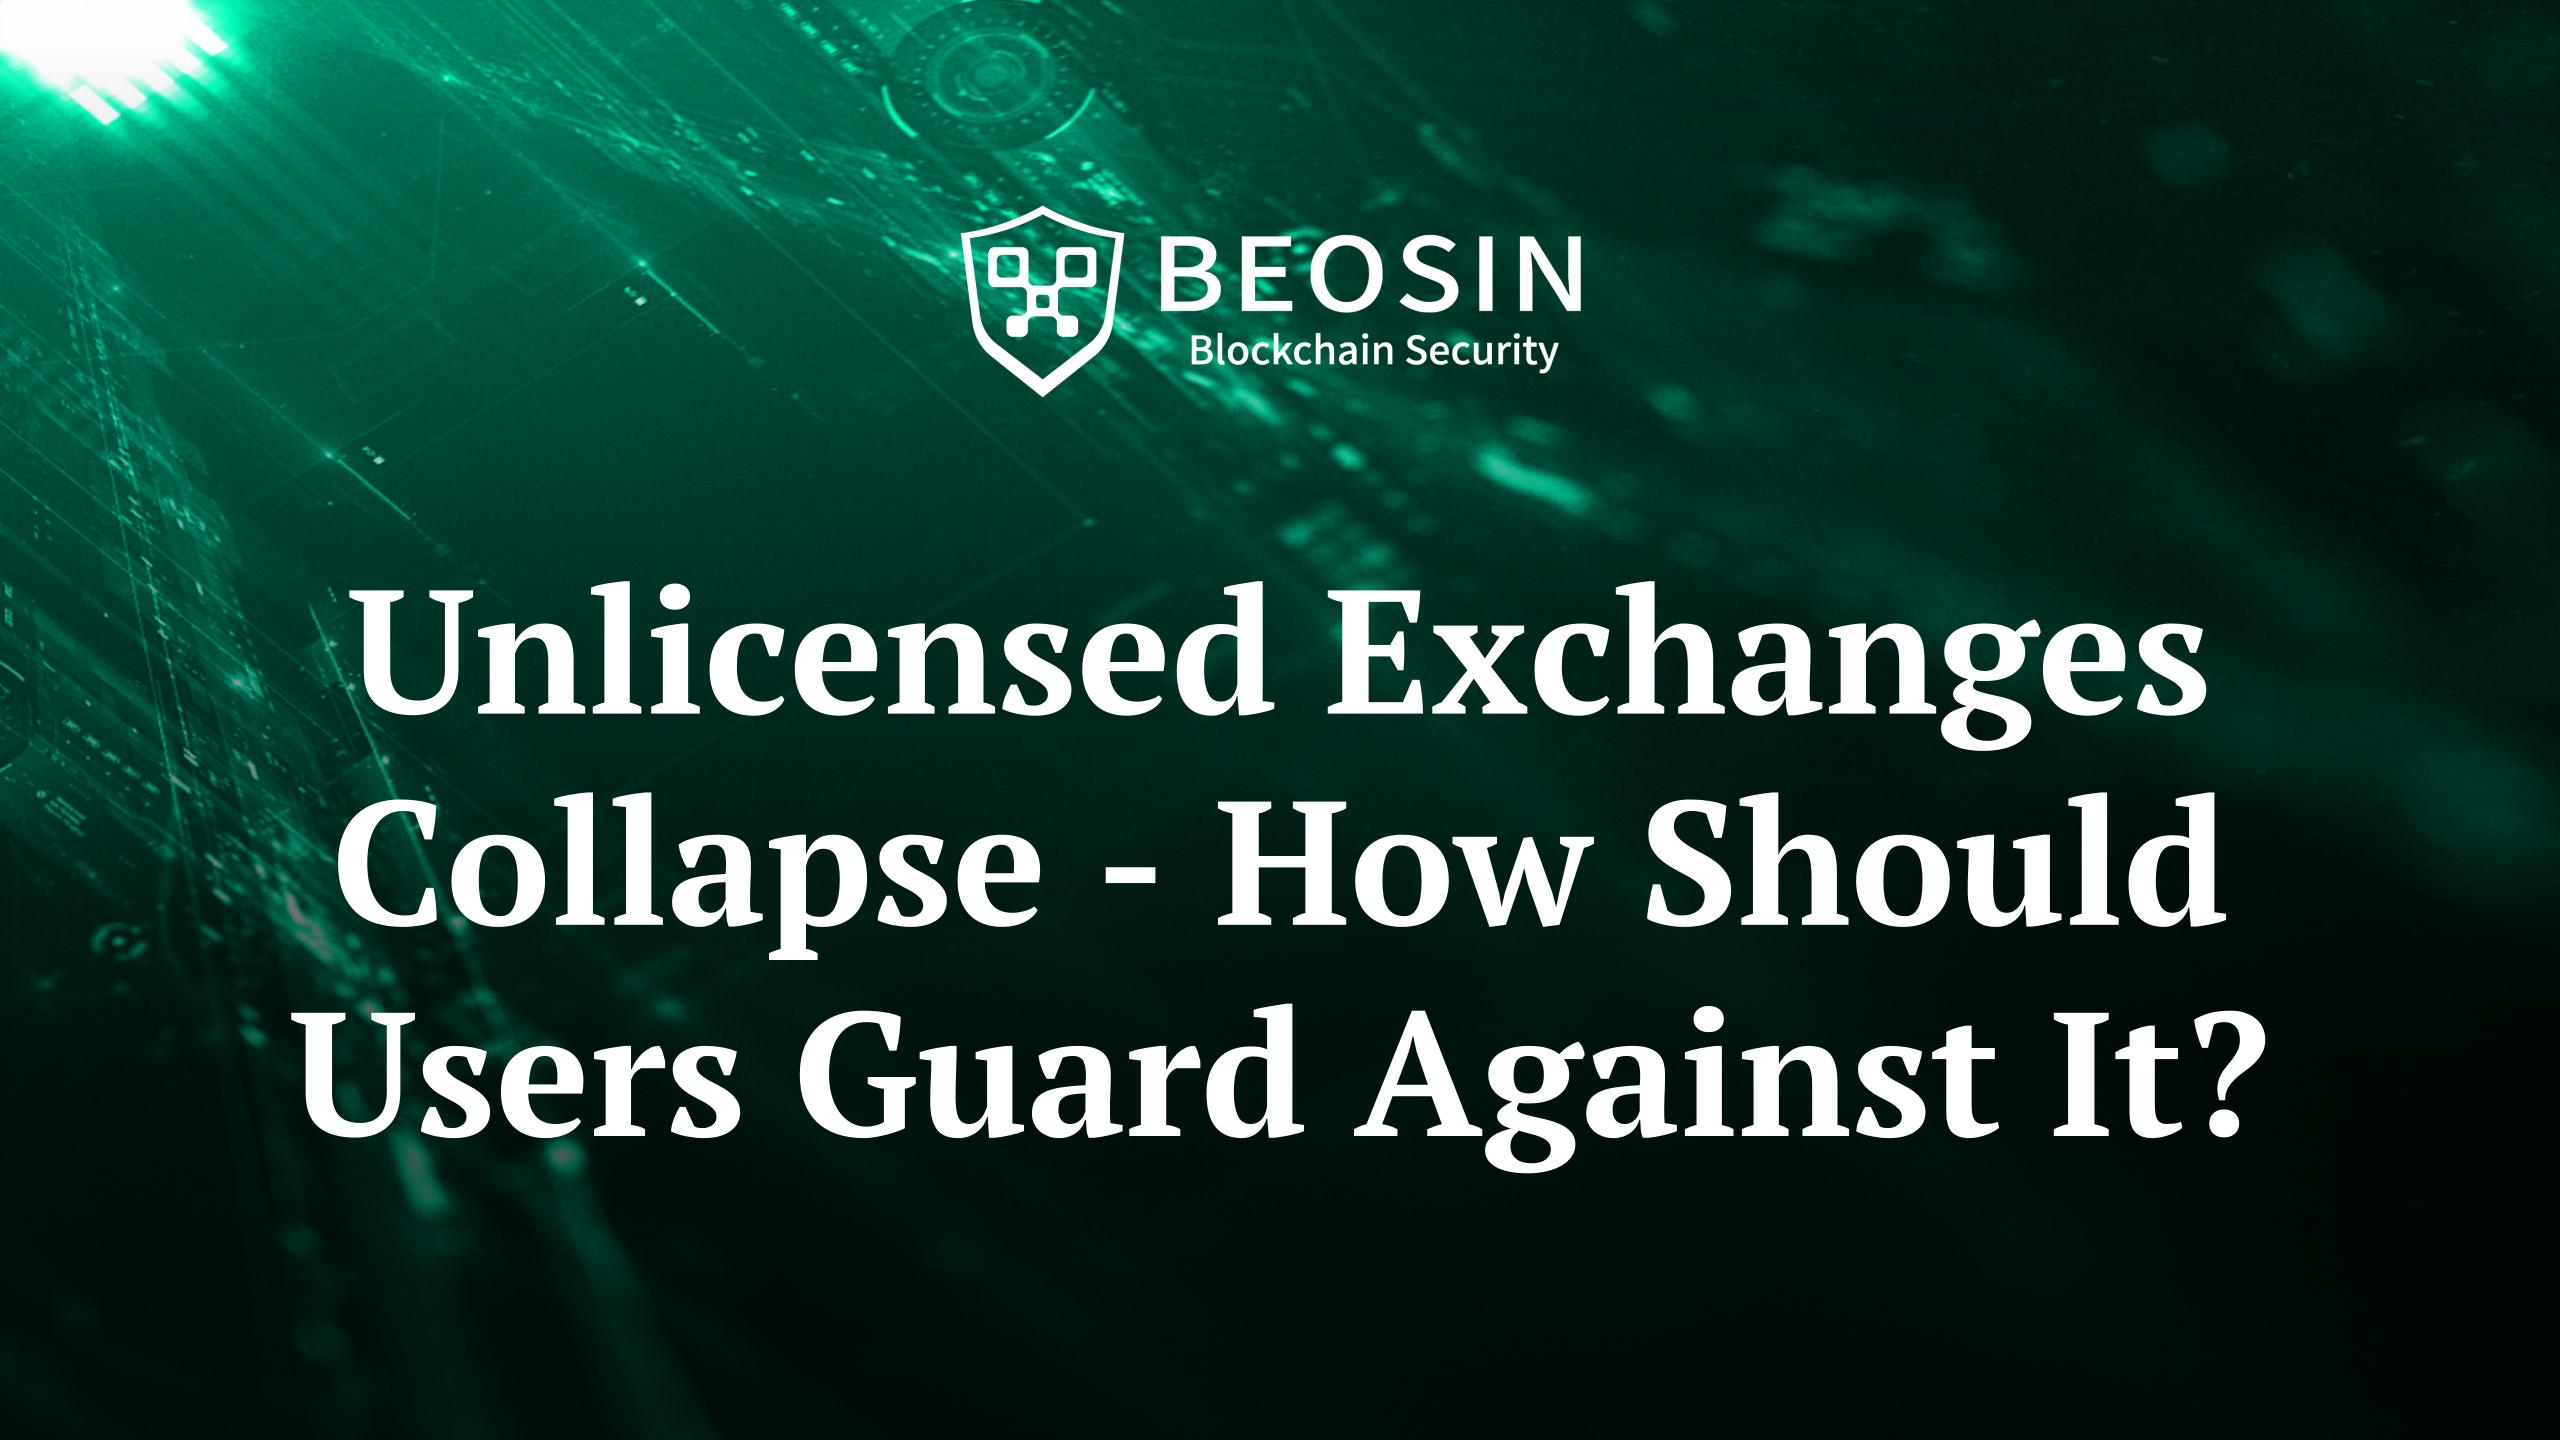 Unlicensed Exchanges Collapse - How Should Users Guard Against It?